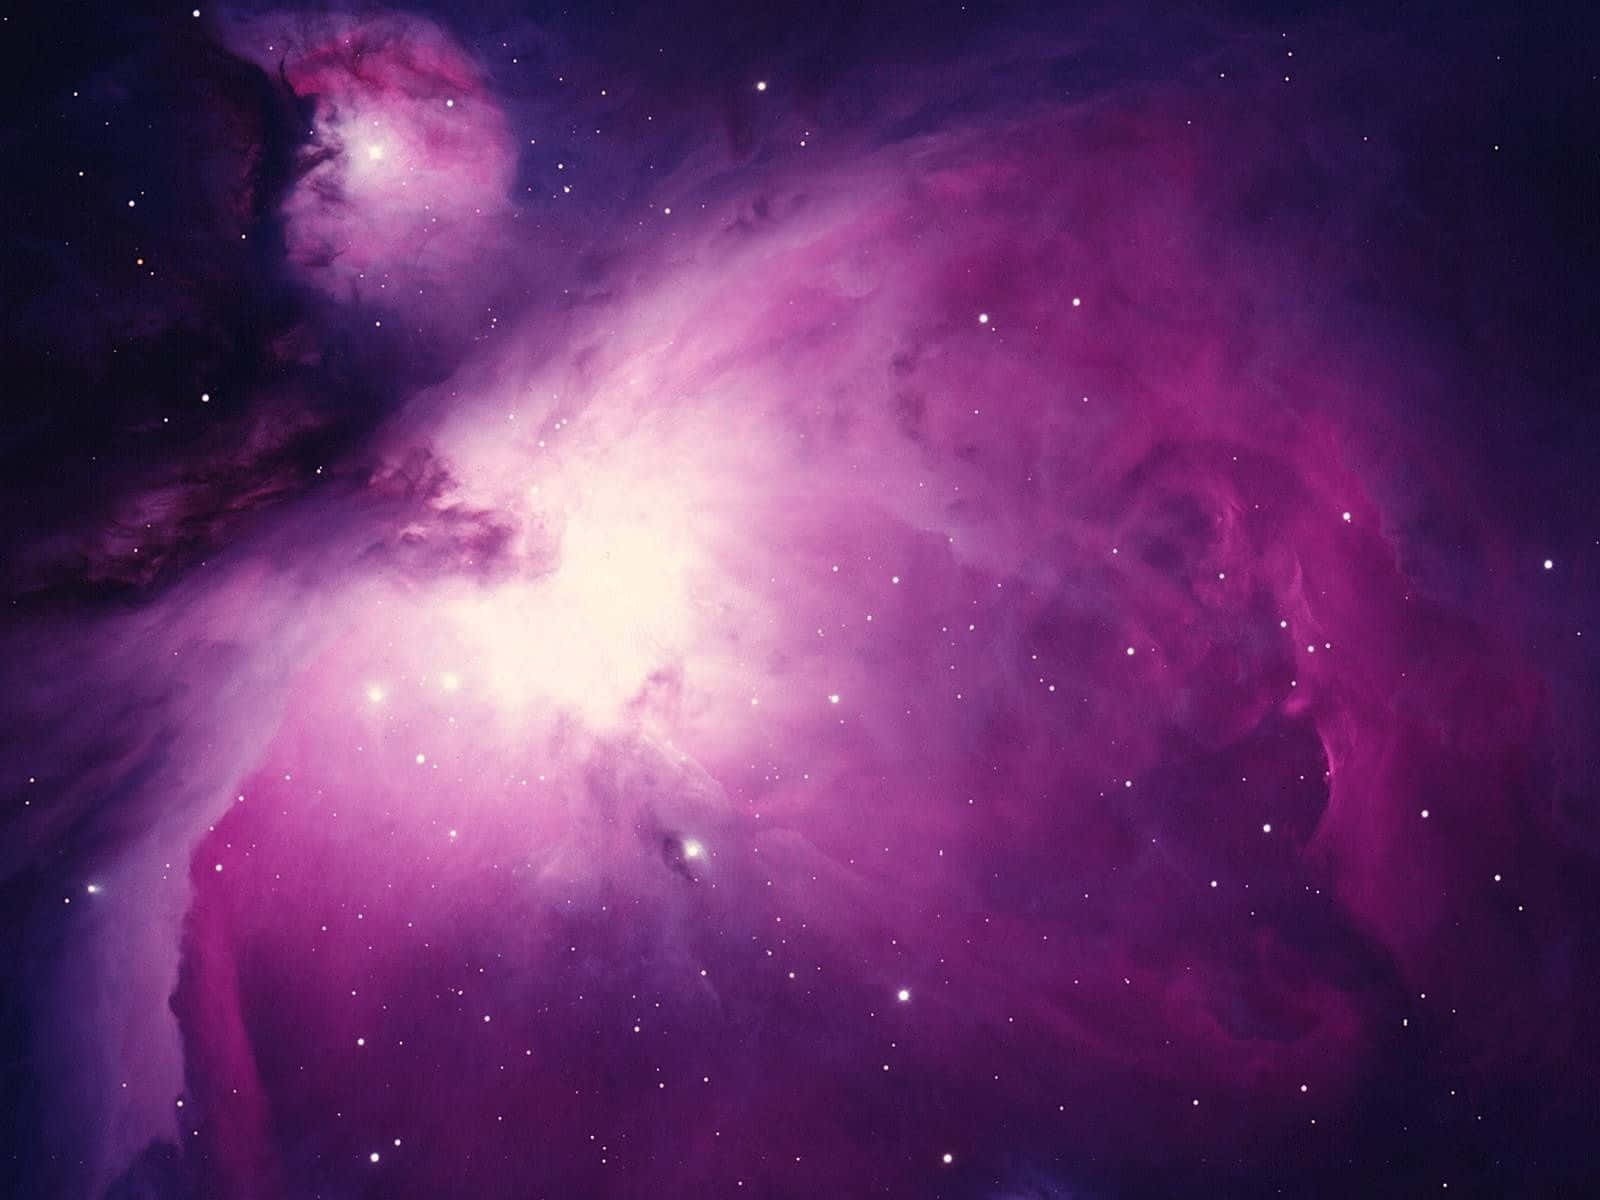 “Explore the Endless Possibilities of a Pink and Purple Galaxy” Wallpaper